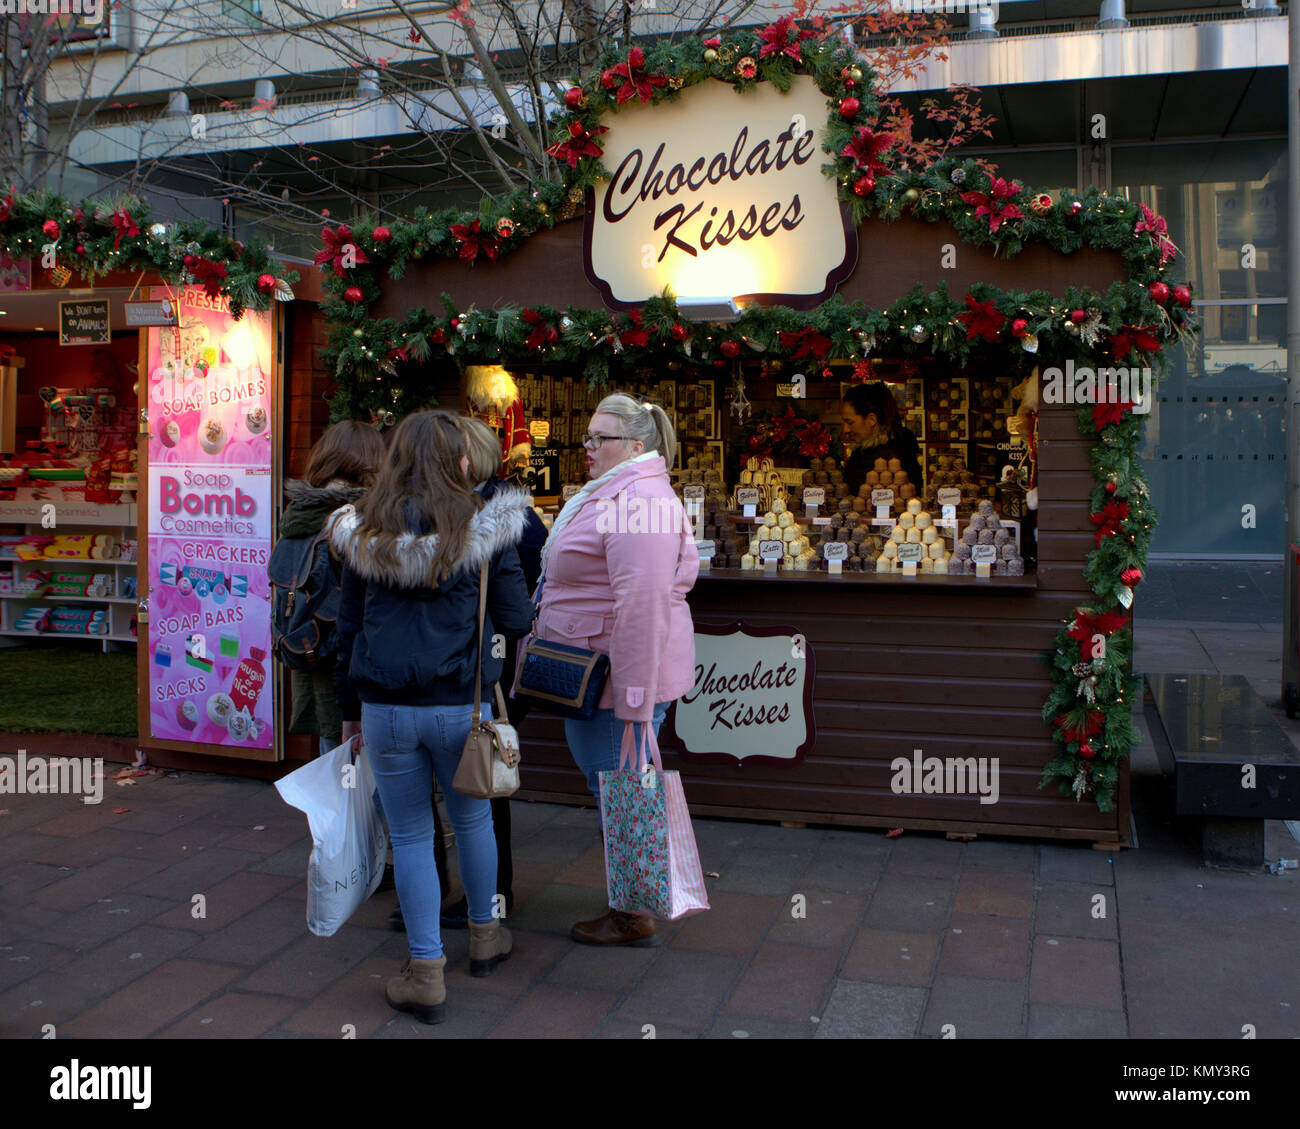 fat girls women chocolate kisses sweets christmas market glasgow stalls and people Stock Photo